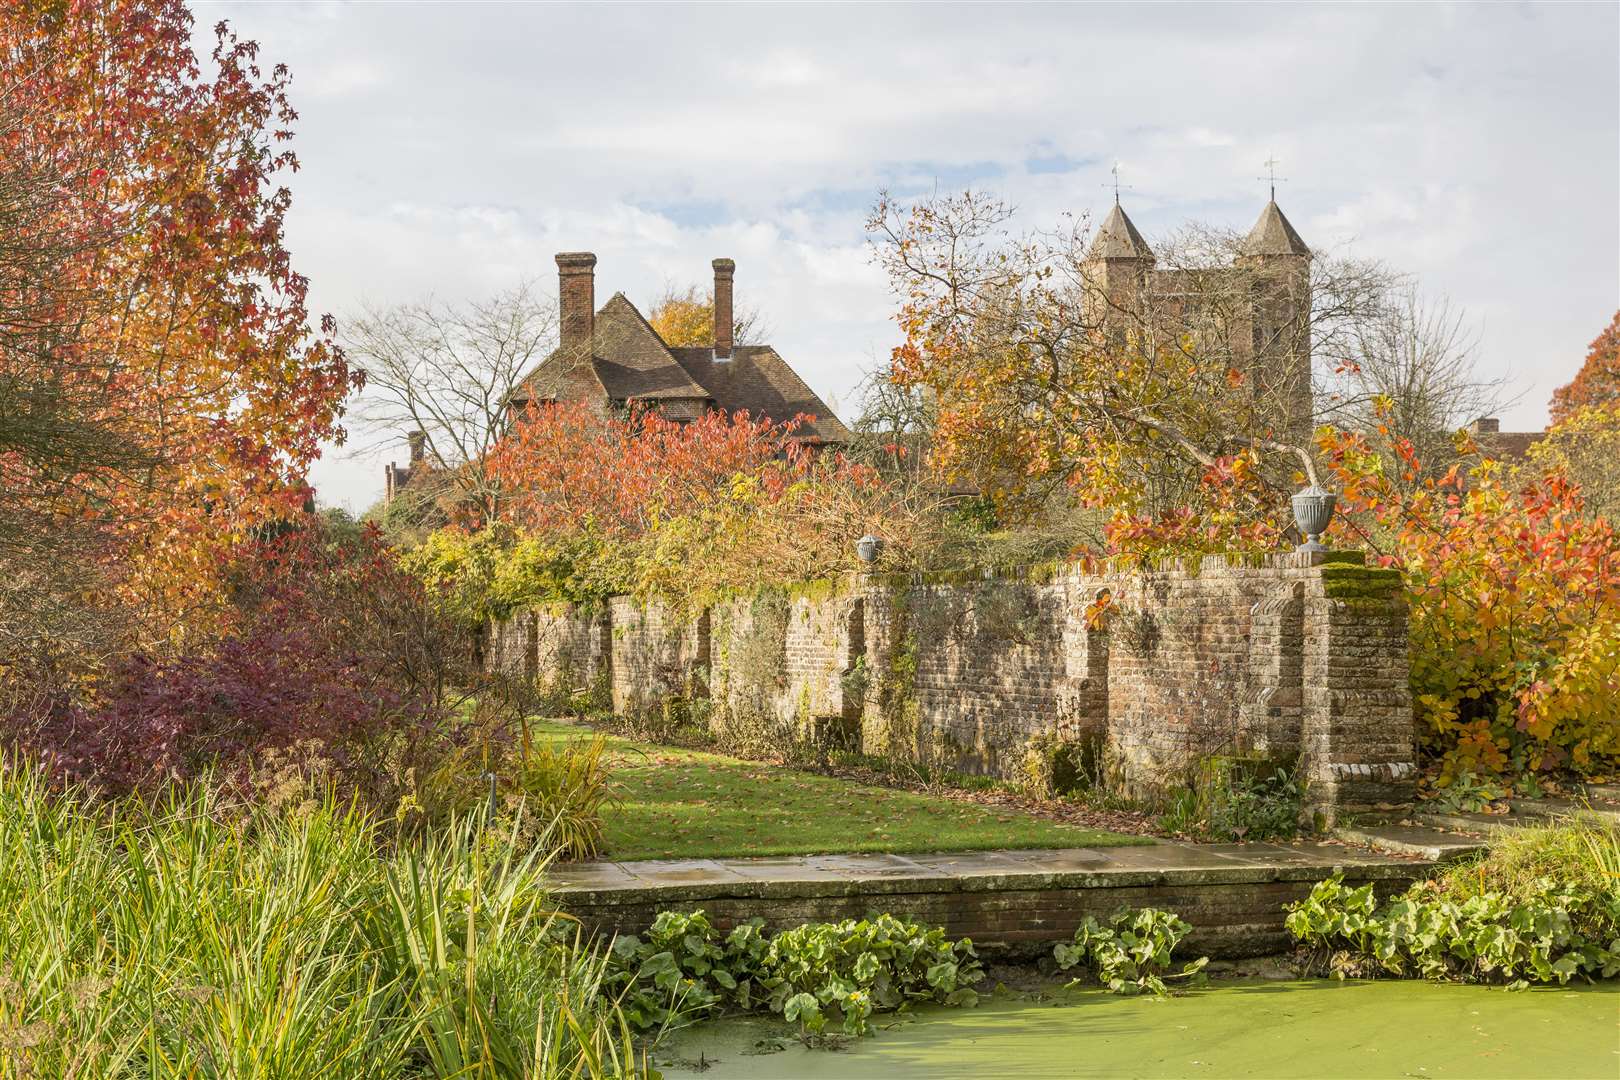 Capture the view of the gatehouse tower through the autumnal gardens at Sissinghurst Castle Garden.Picture: ©National Trust Images / James Dobson